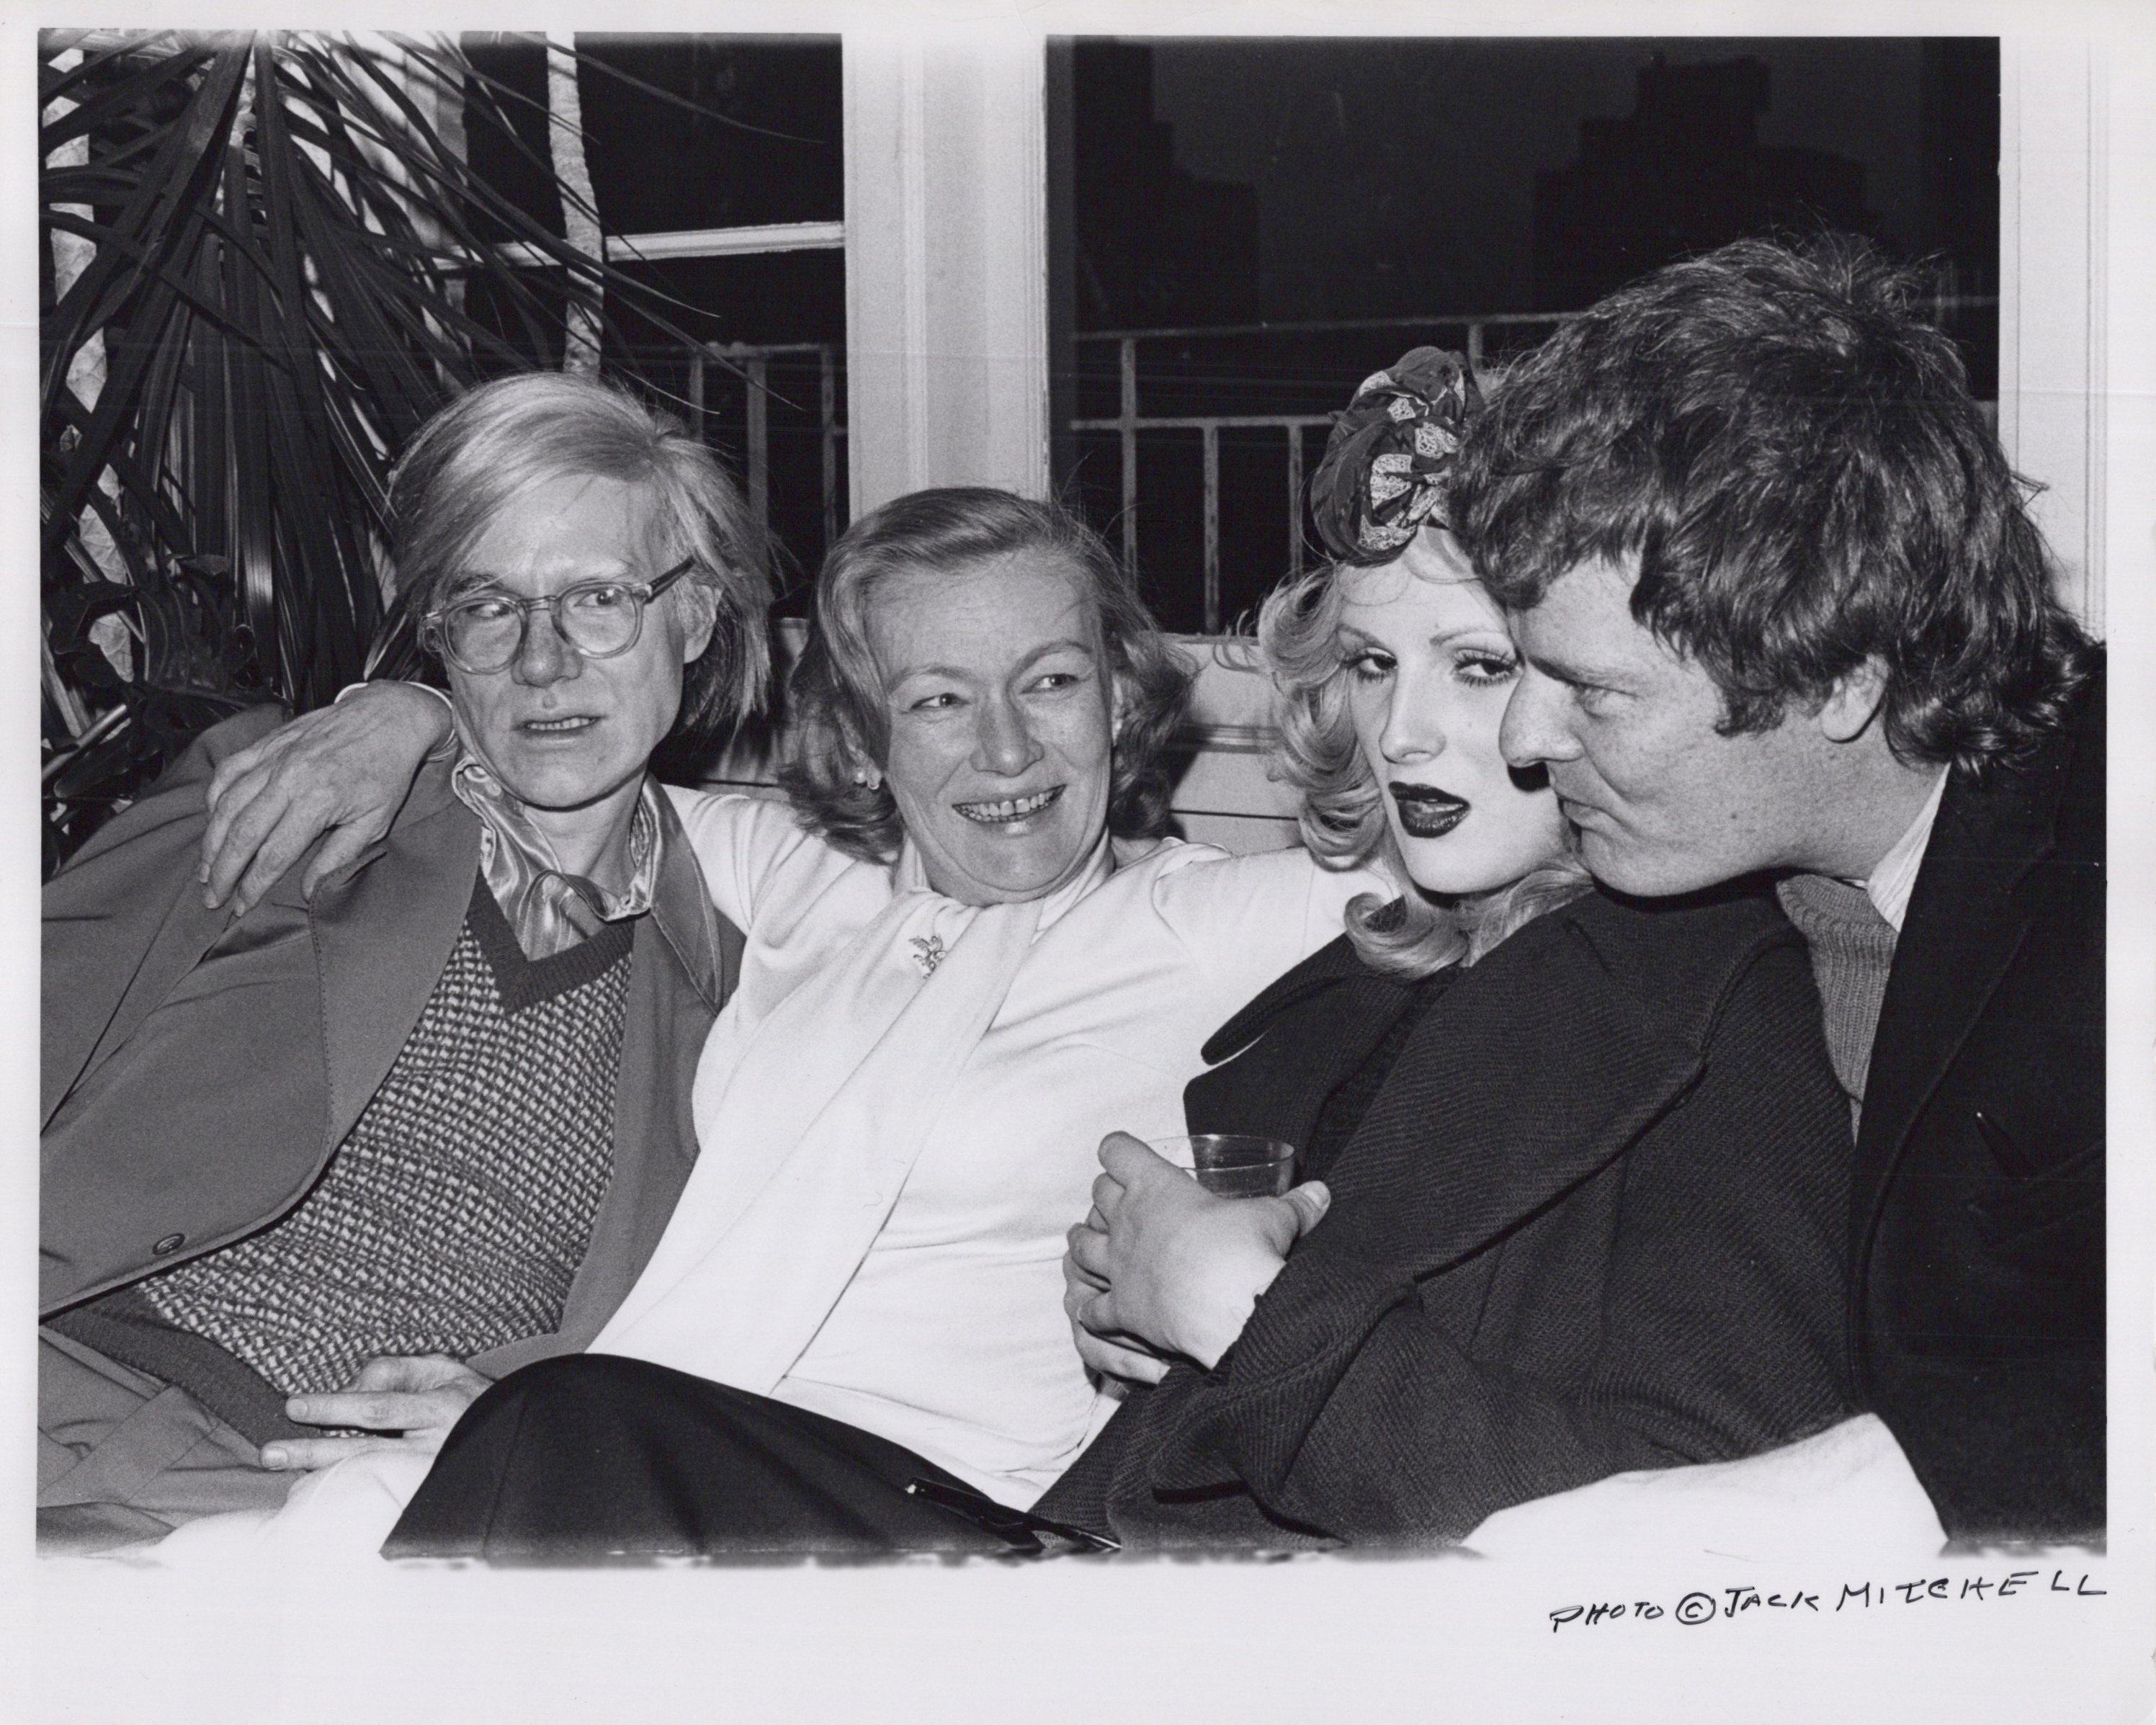 Black and White Photograph Jack Mitchell - Veronica Lake lors d'une fête avec Andy Warhol, Candy Darling et Paul Morrissey